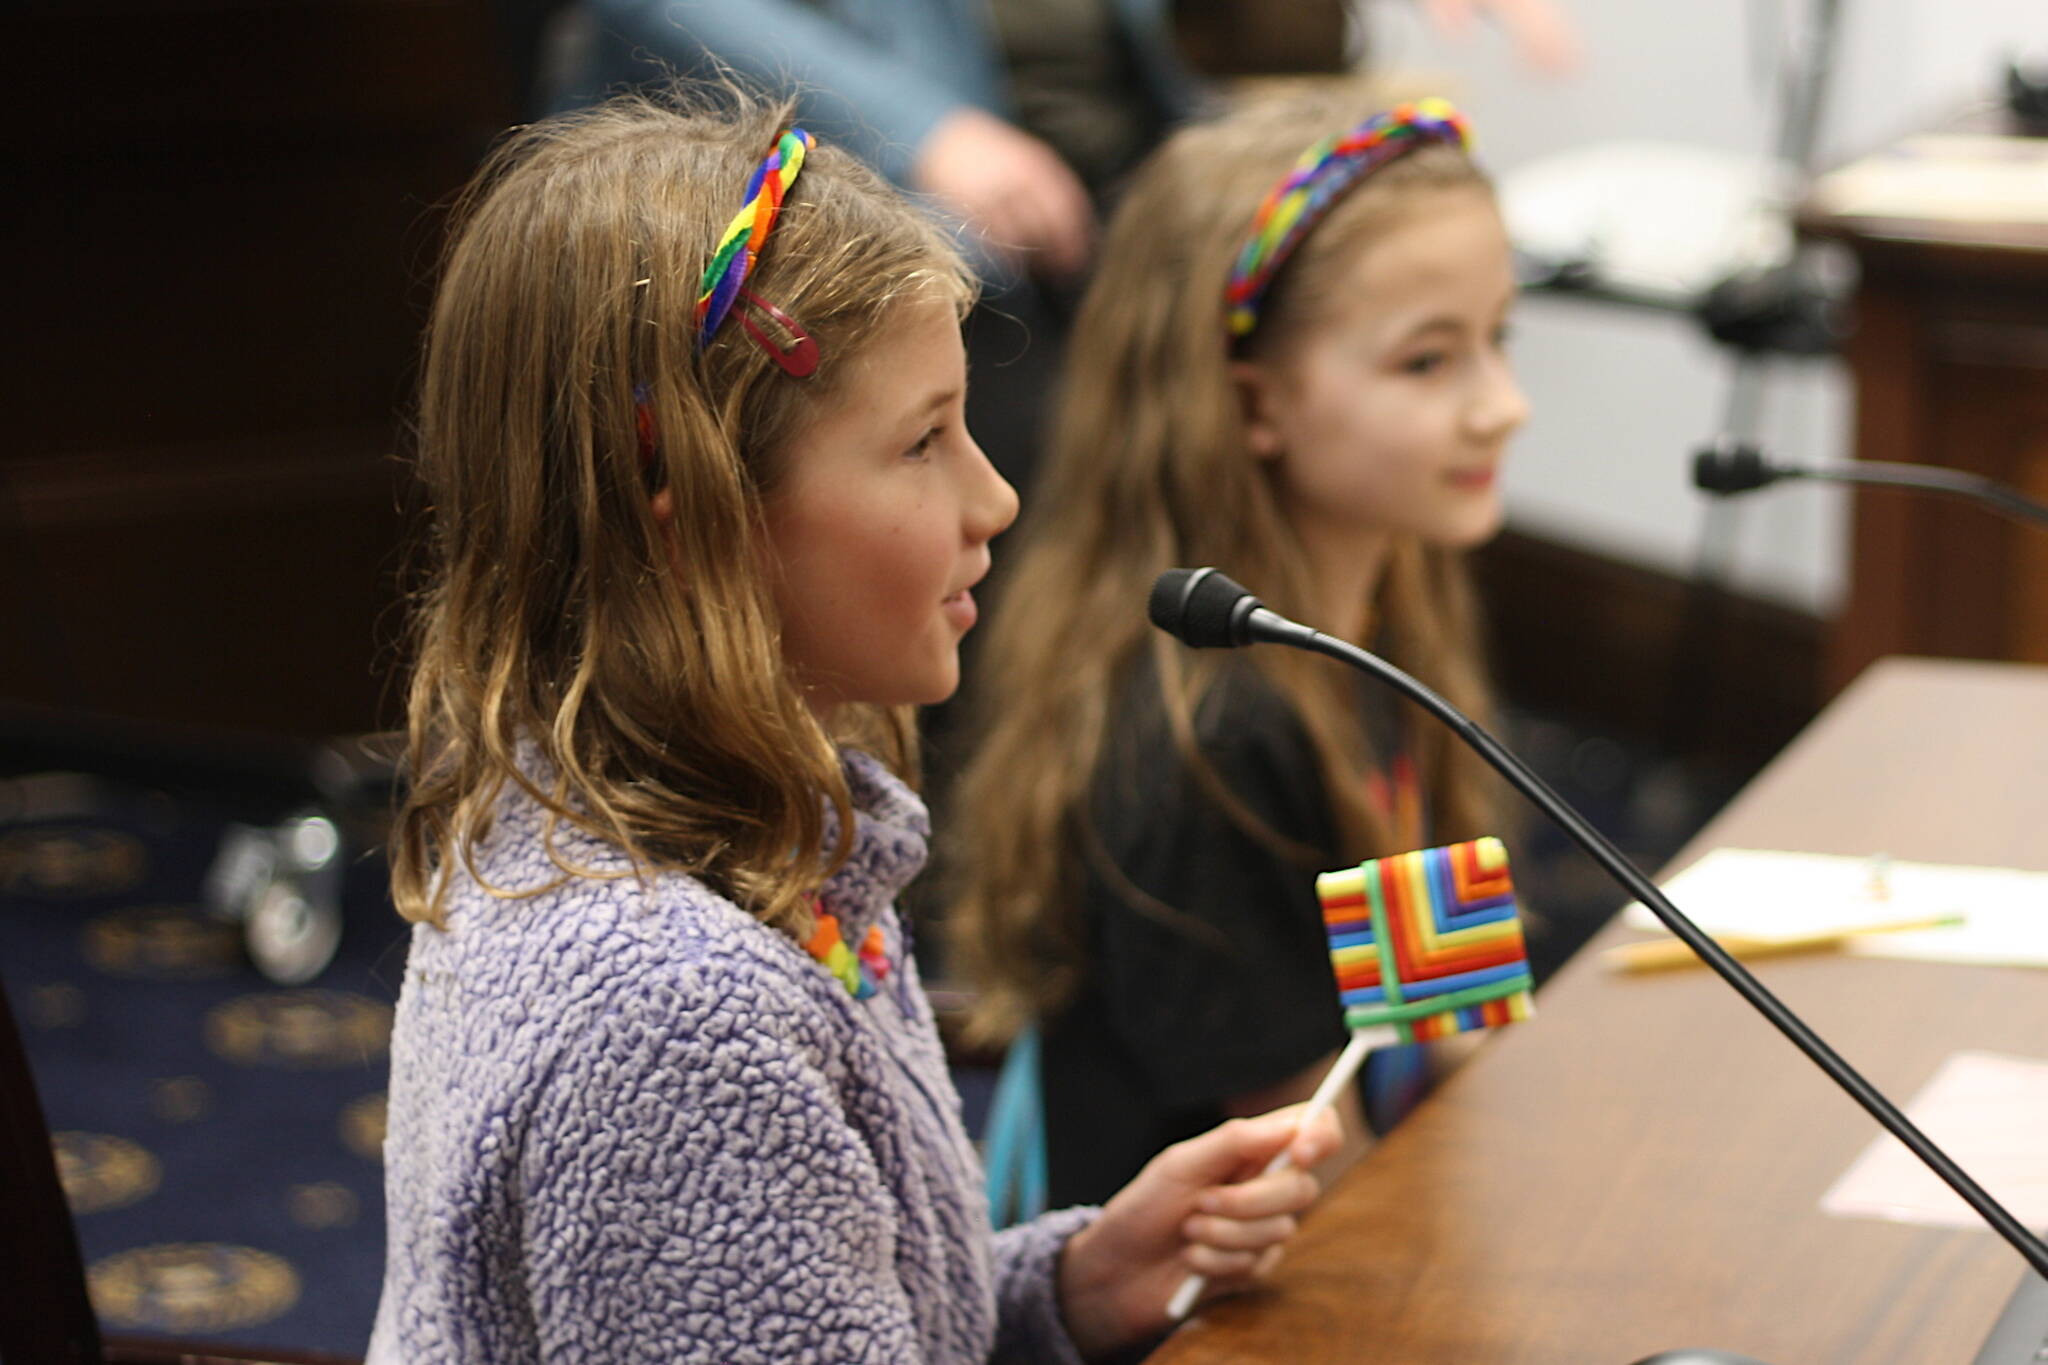 Nayeli Hood, 10, foreground, and Ona Eckerson, 9, testify against a bill limiting sex and gender content in schools during a House Education Committee meeting Thursday night. (Mark Sabbatini / Juneau Empire)